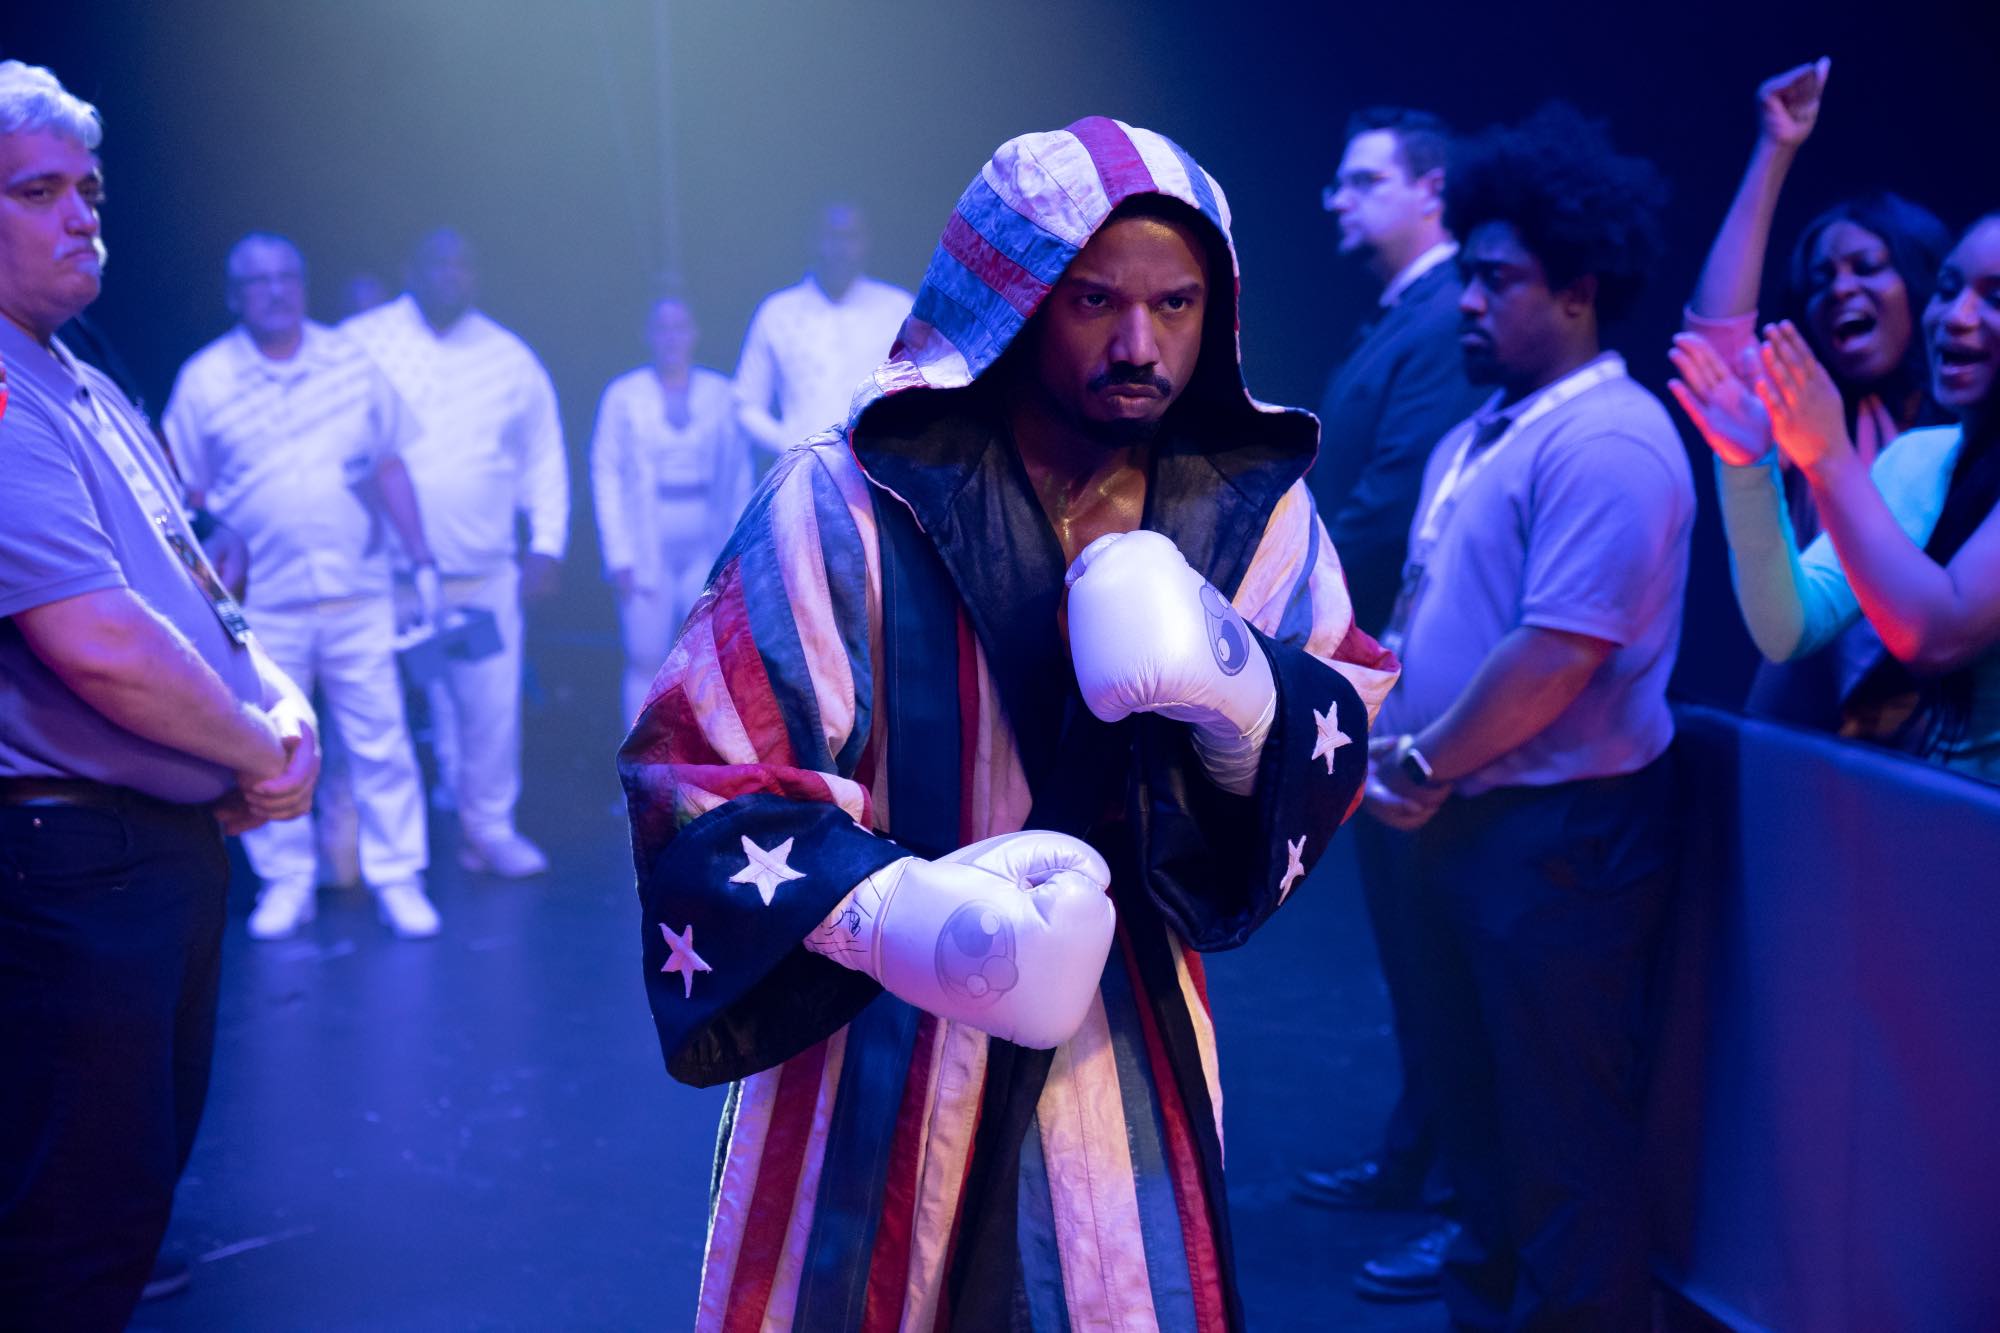 'Creed III' Michael B. Jordan as Adonis Creed wearing an American flag boxing costume hooded and white boxing gloves surrounded by arena-attendants